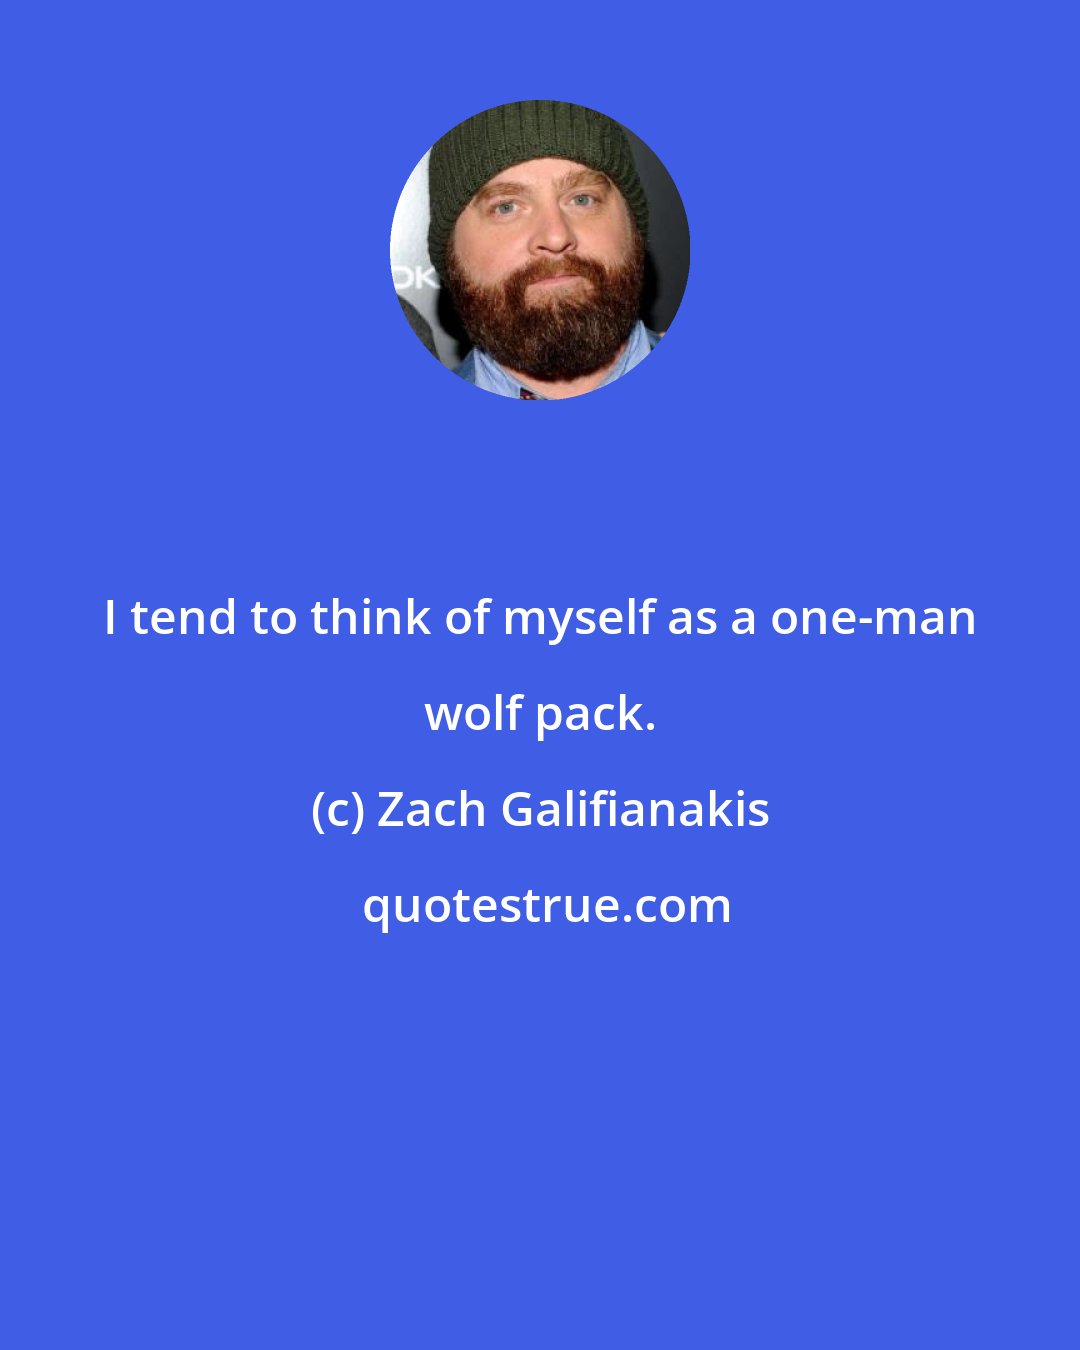 Zach Galifianakis: I tend to think of myself as a one-man wolf pack.